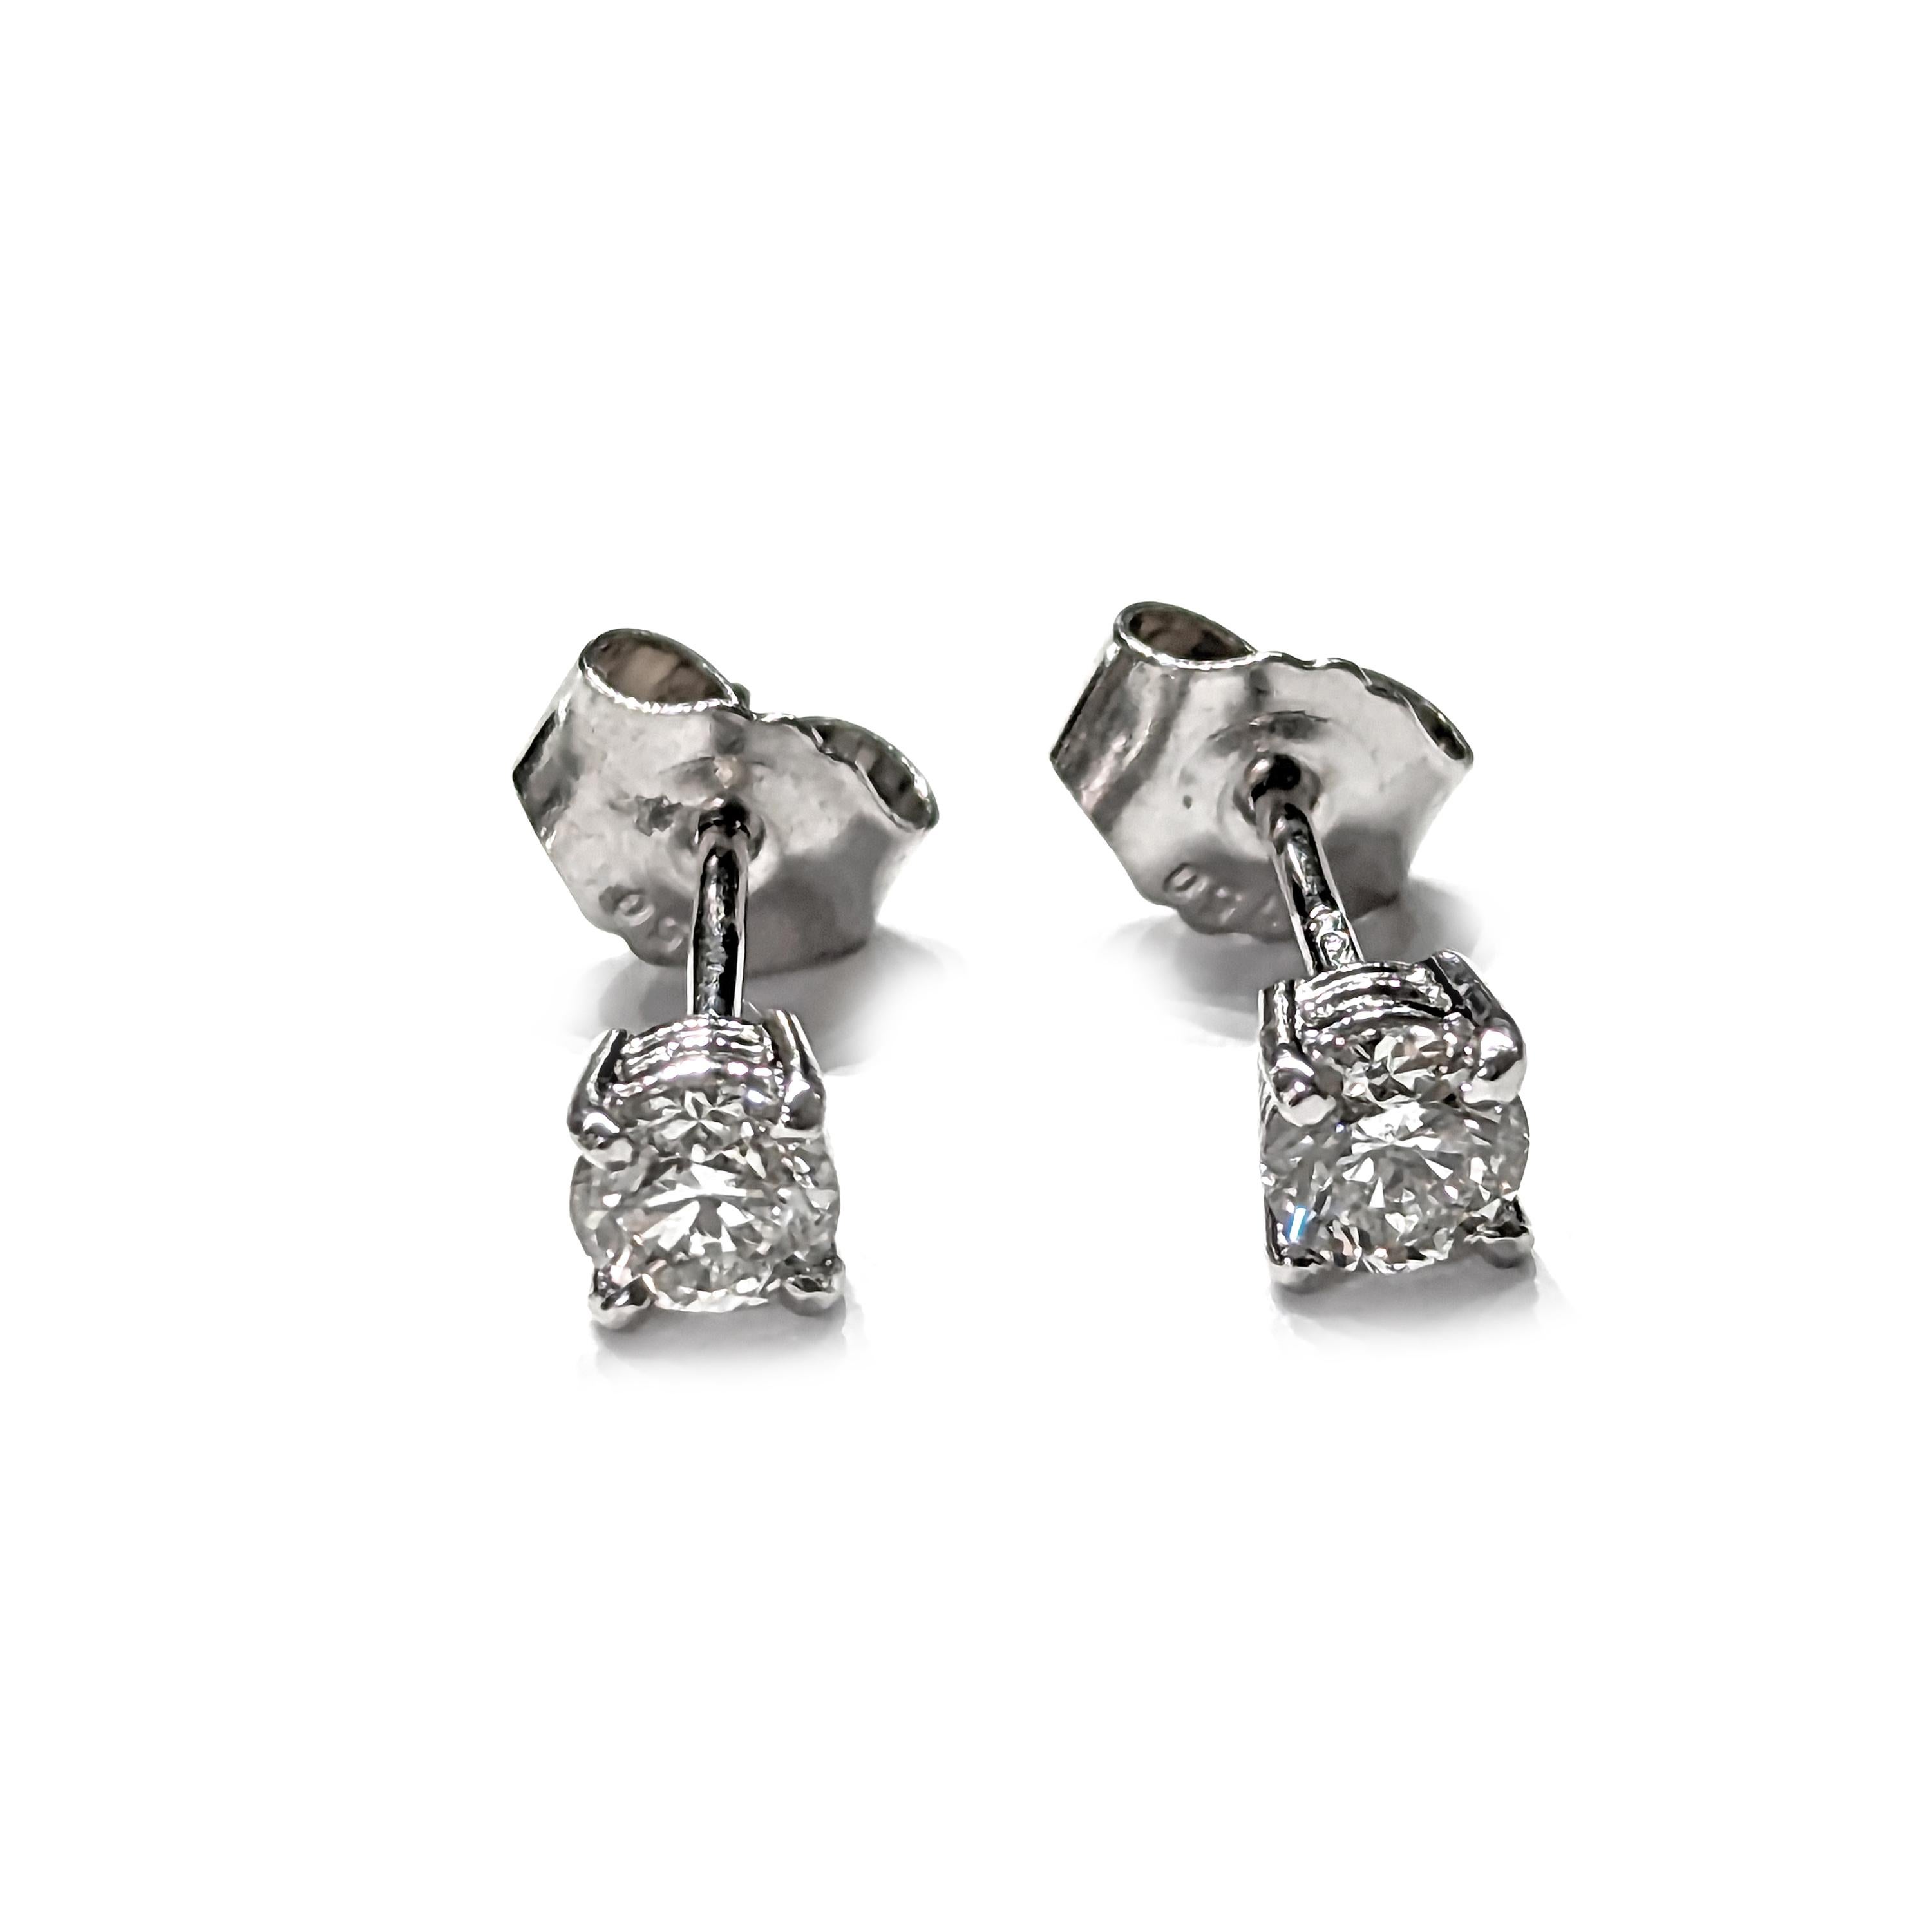 Modern Diamond And White Gold Stud Earrings, 0.52 Carats For Sale 5